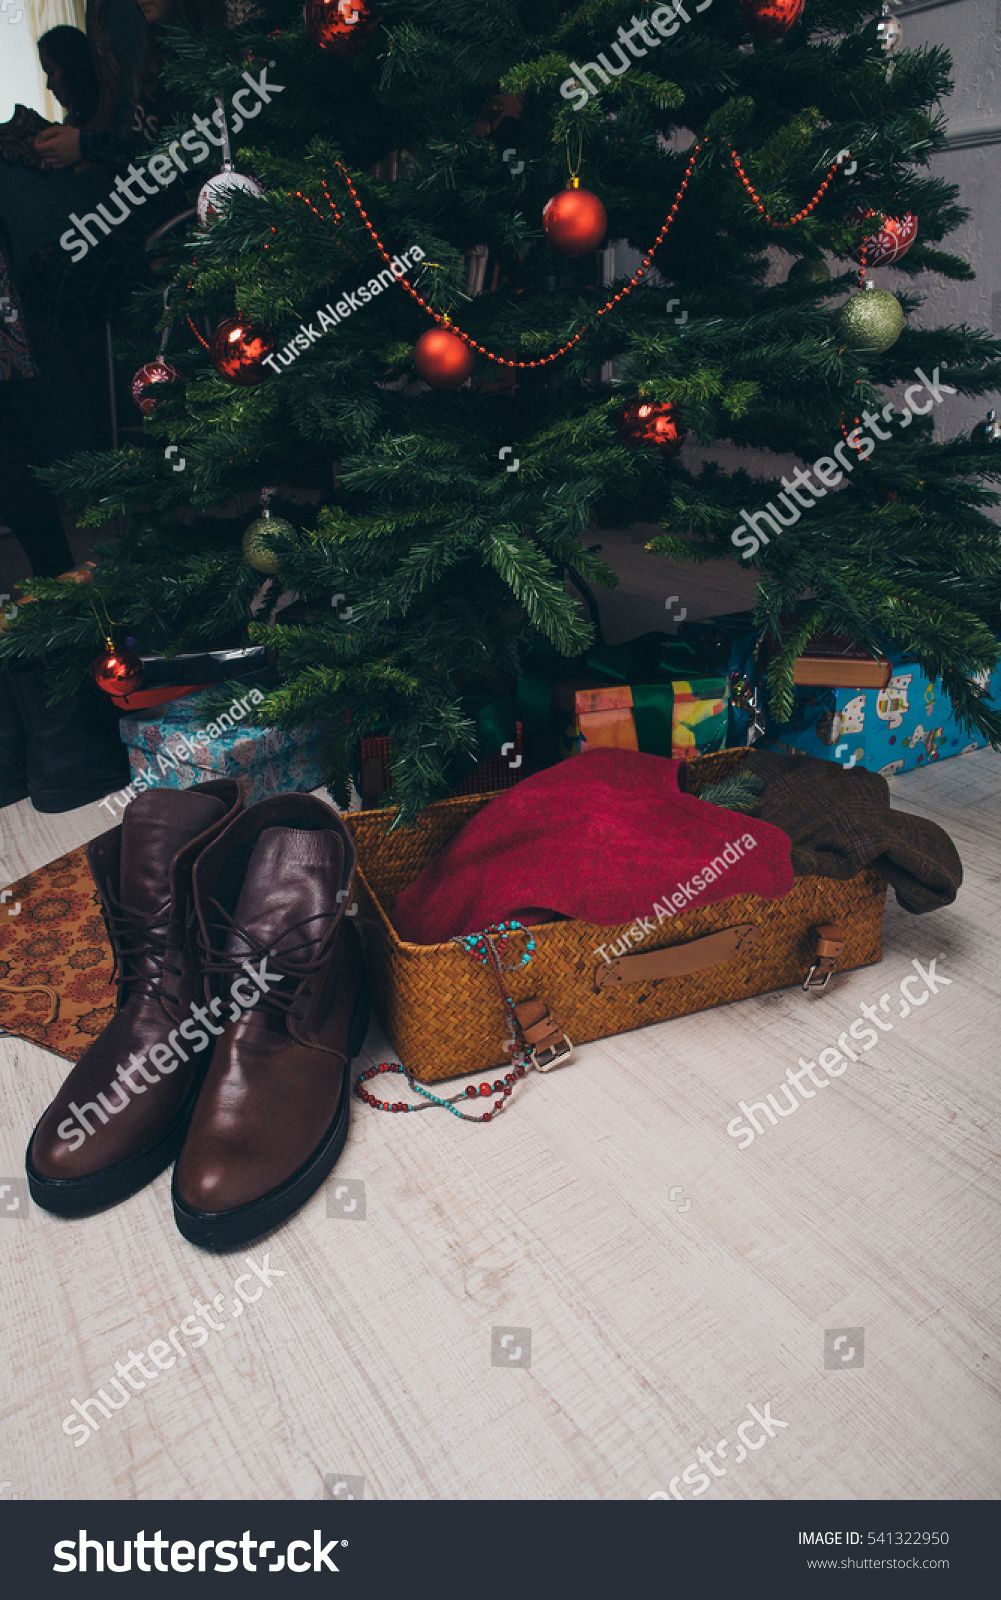 Shoes And Gifts Under The Christmas Tree Stock Photo 541322950 ...